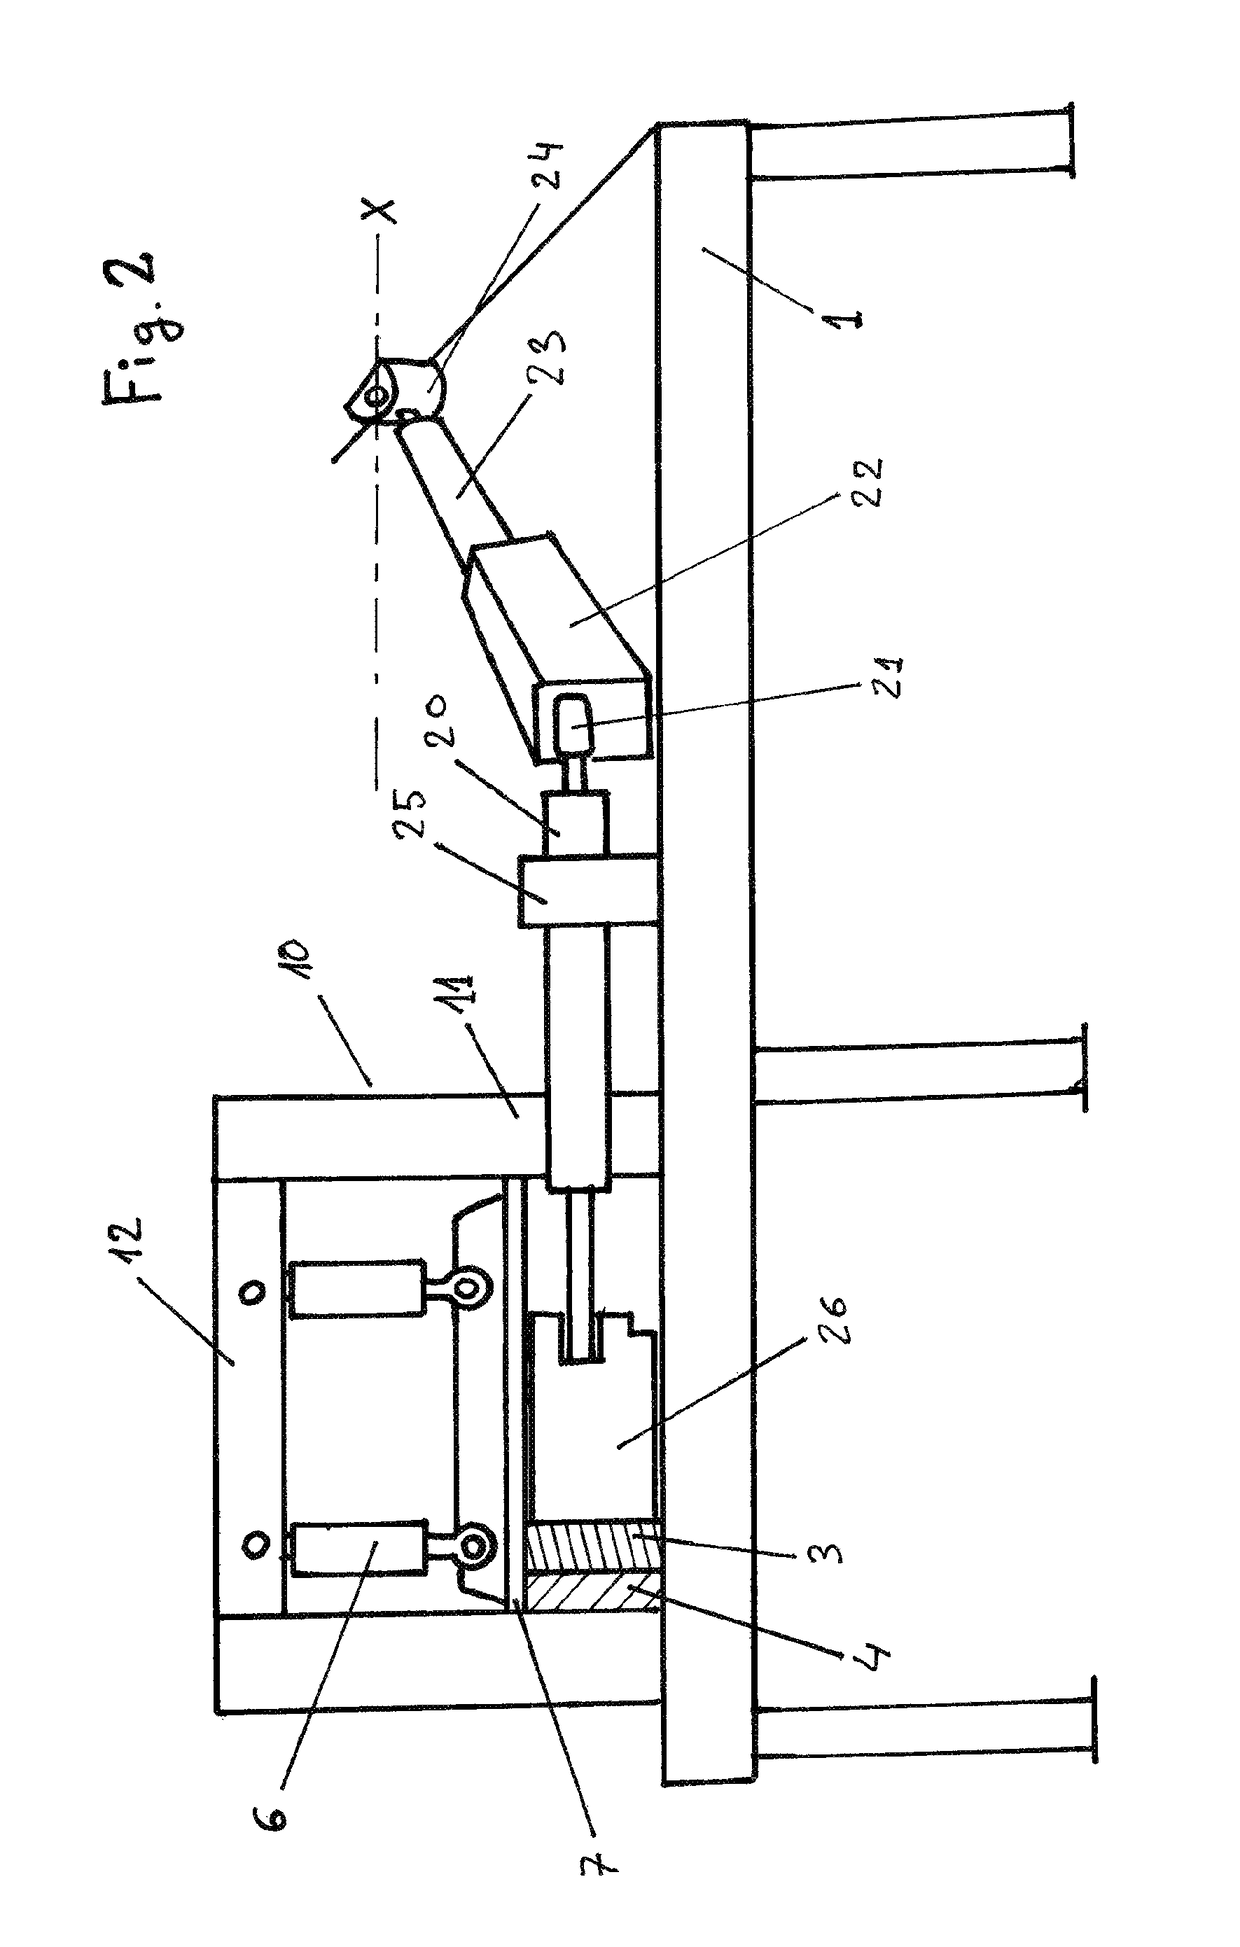 Machine and method for the semi-continuous cold-bending of sections with low ductility